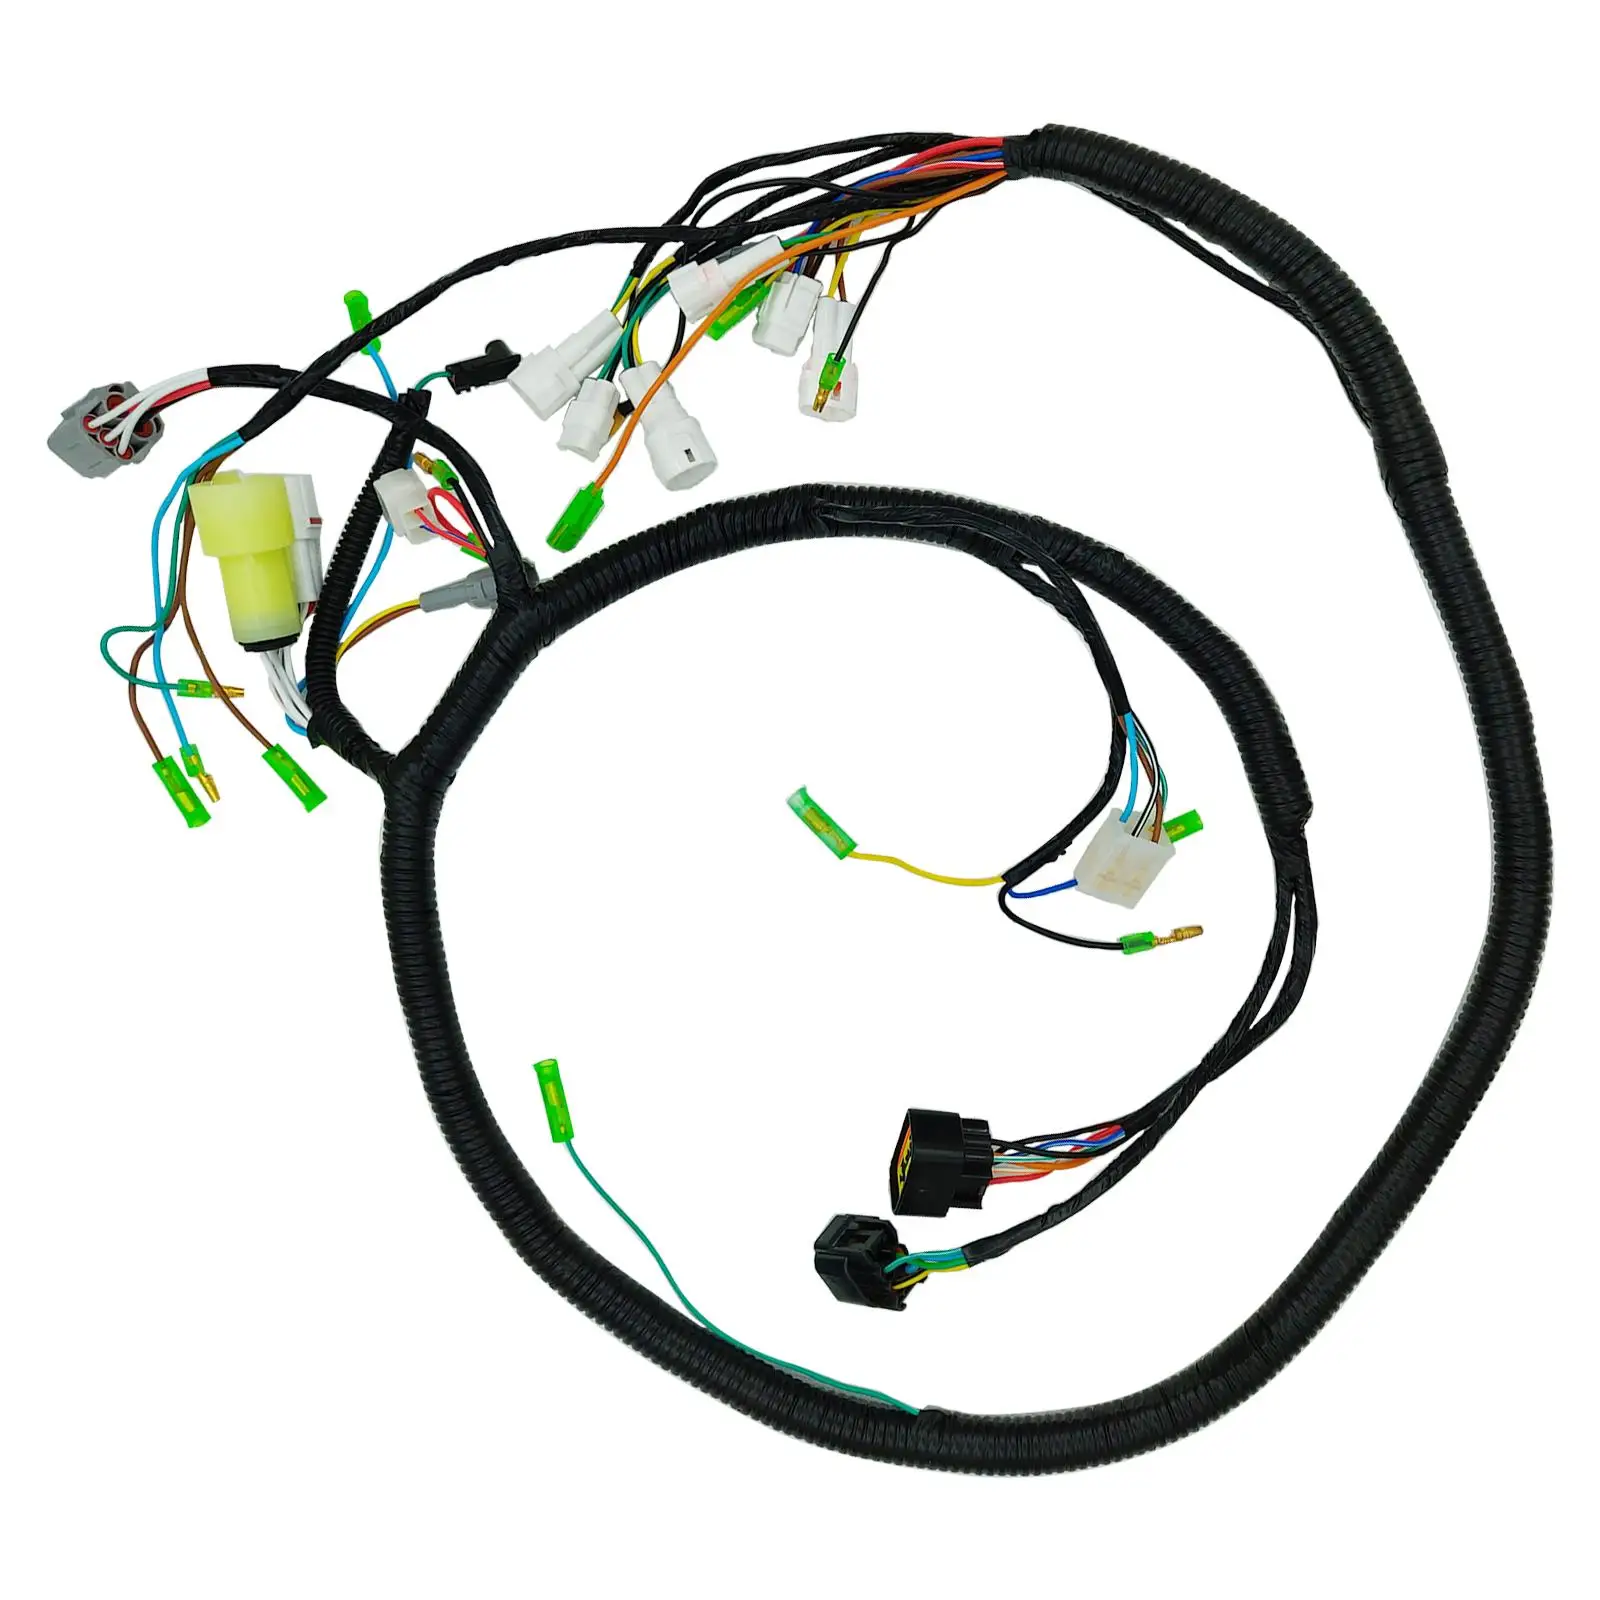 New Wire Harness Assembly  Replacement Fit 50 Yfm350x 2002-2004 Advanced manufacturing technology